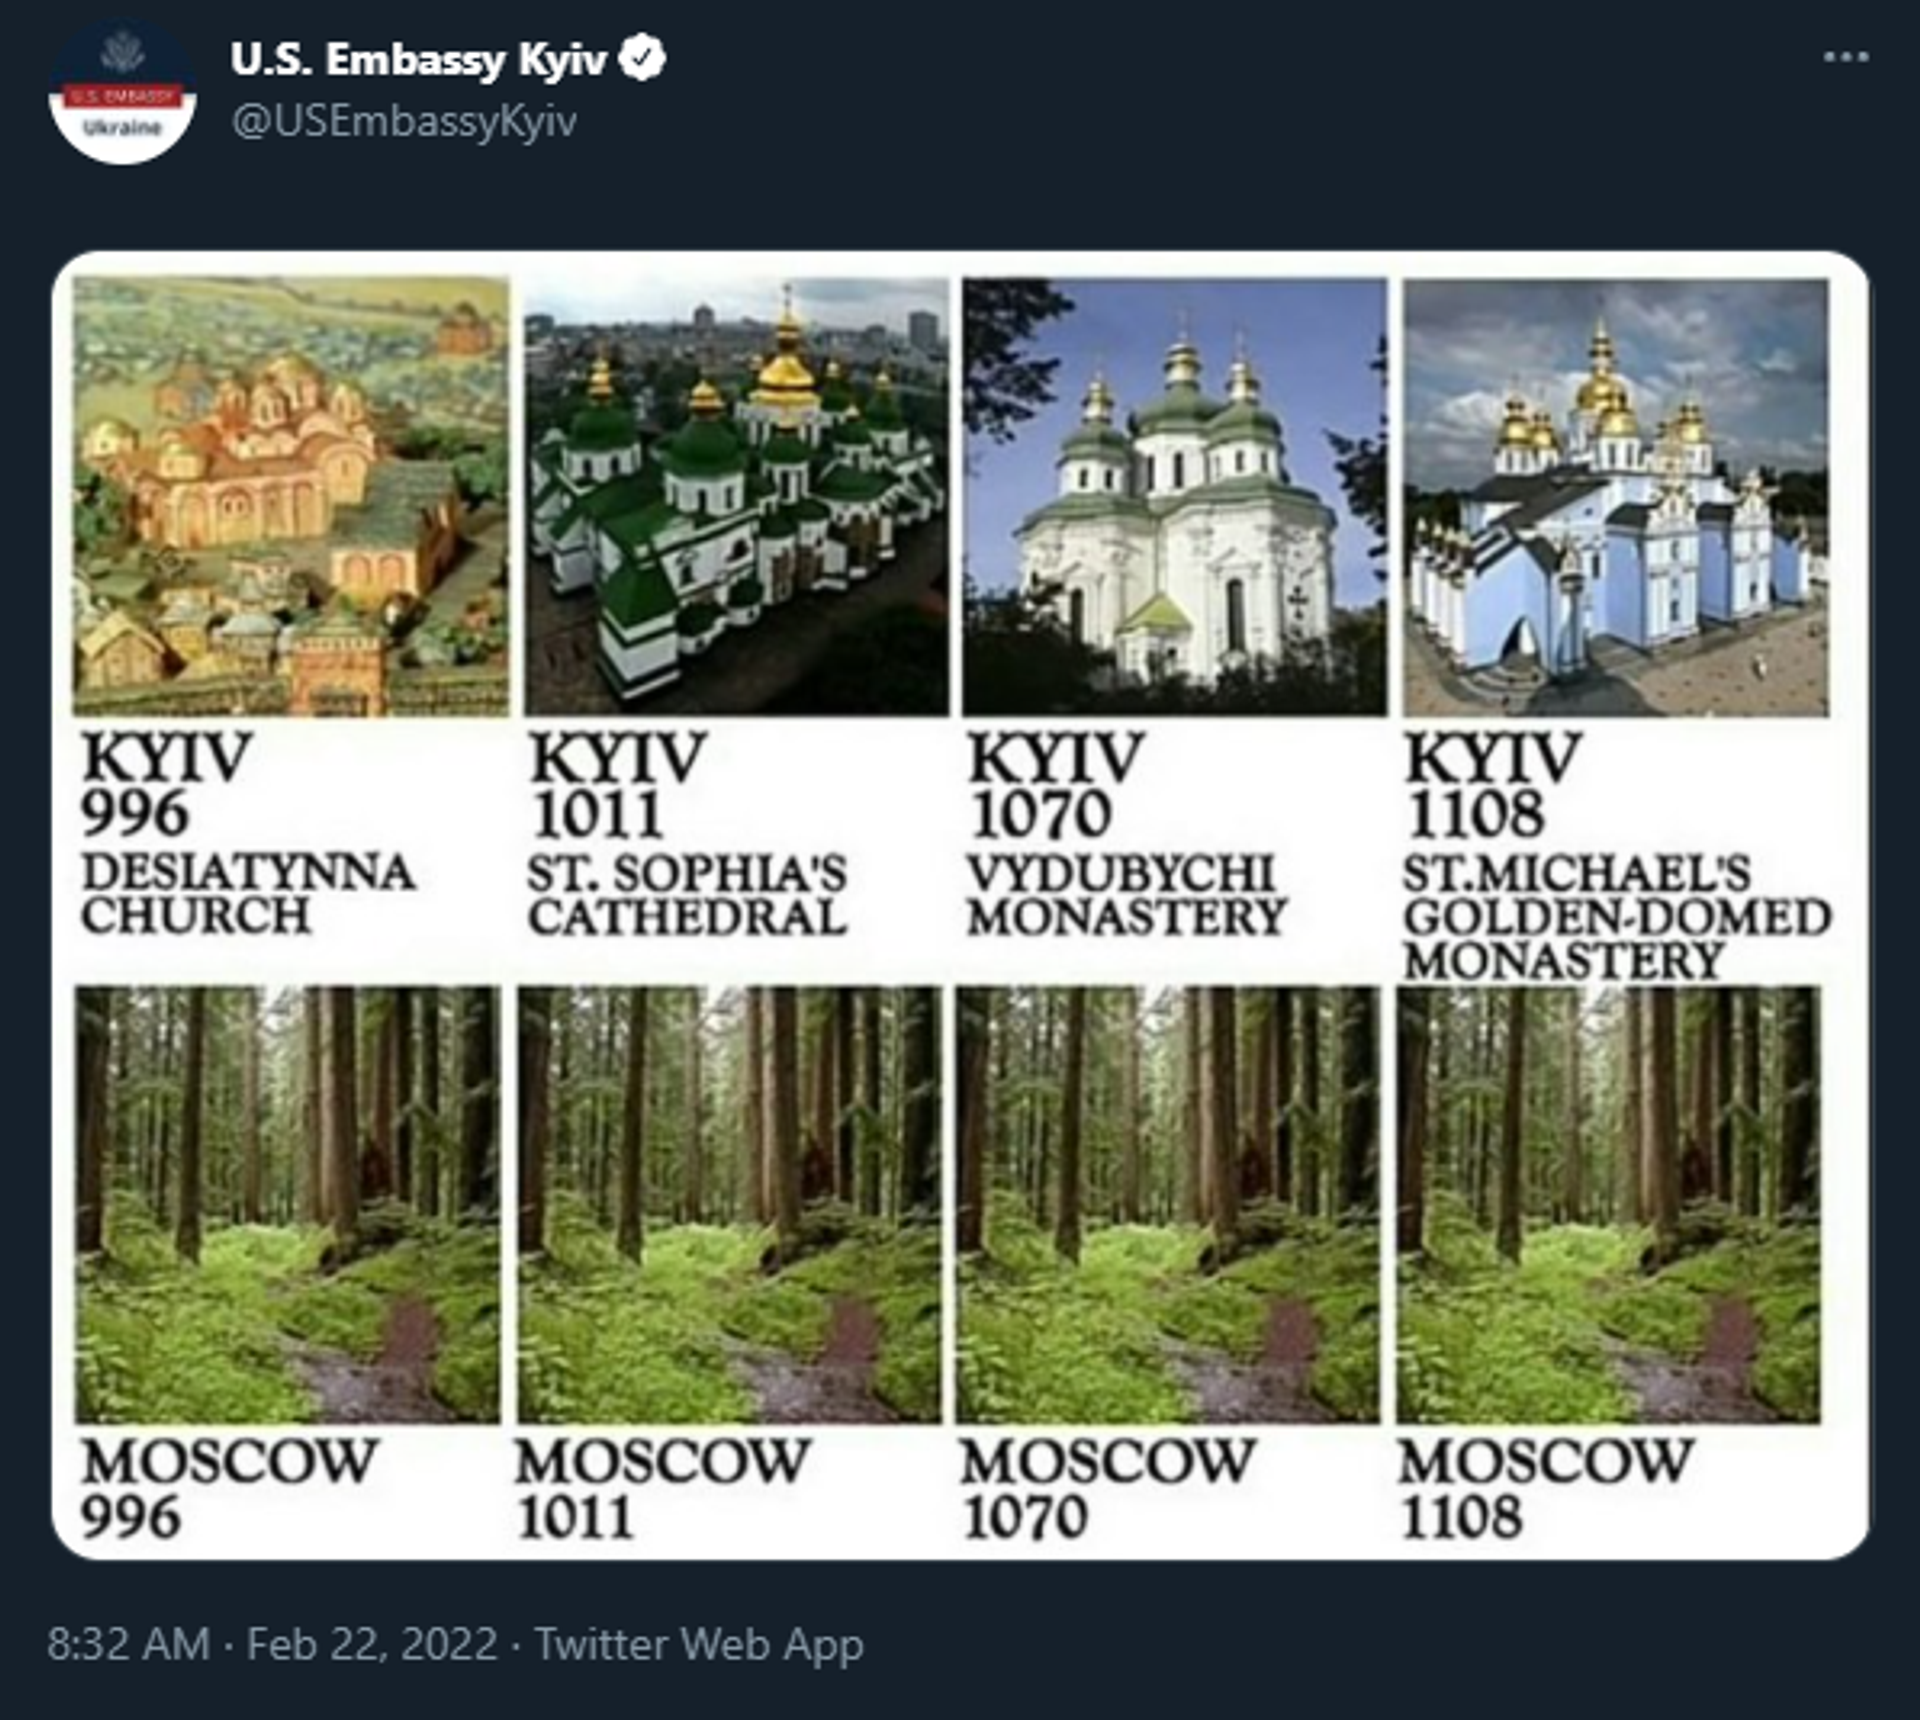 A tweet by the US embassy in Kiev on February 22, 2022, comparing Kiev's and Moscow's histories. - Sputnik International, 1920, 22.02.2022